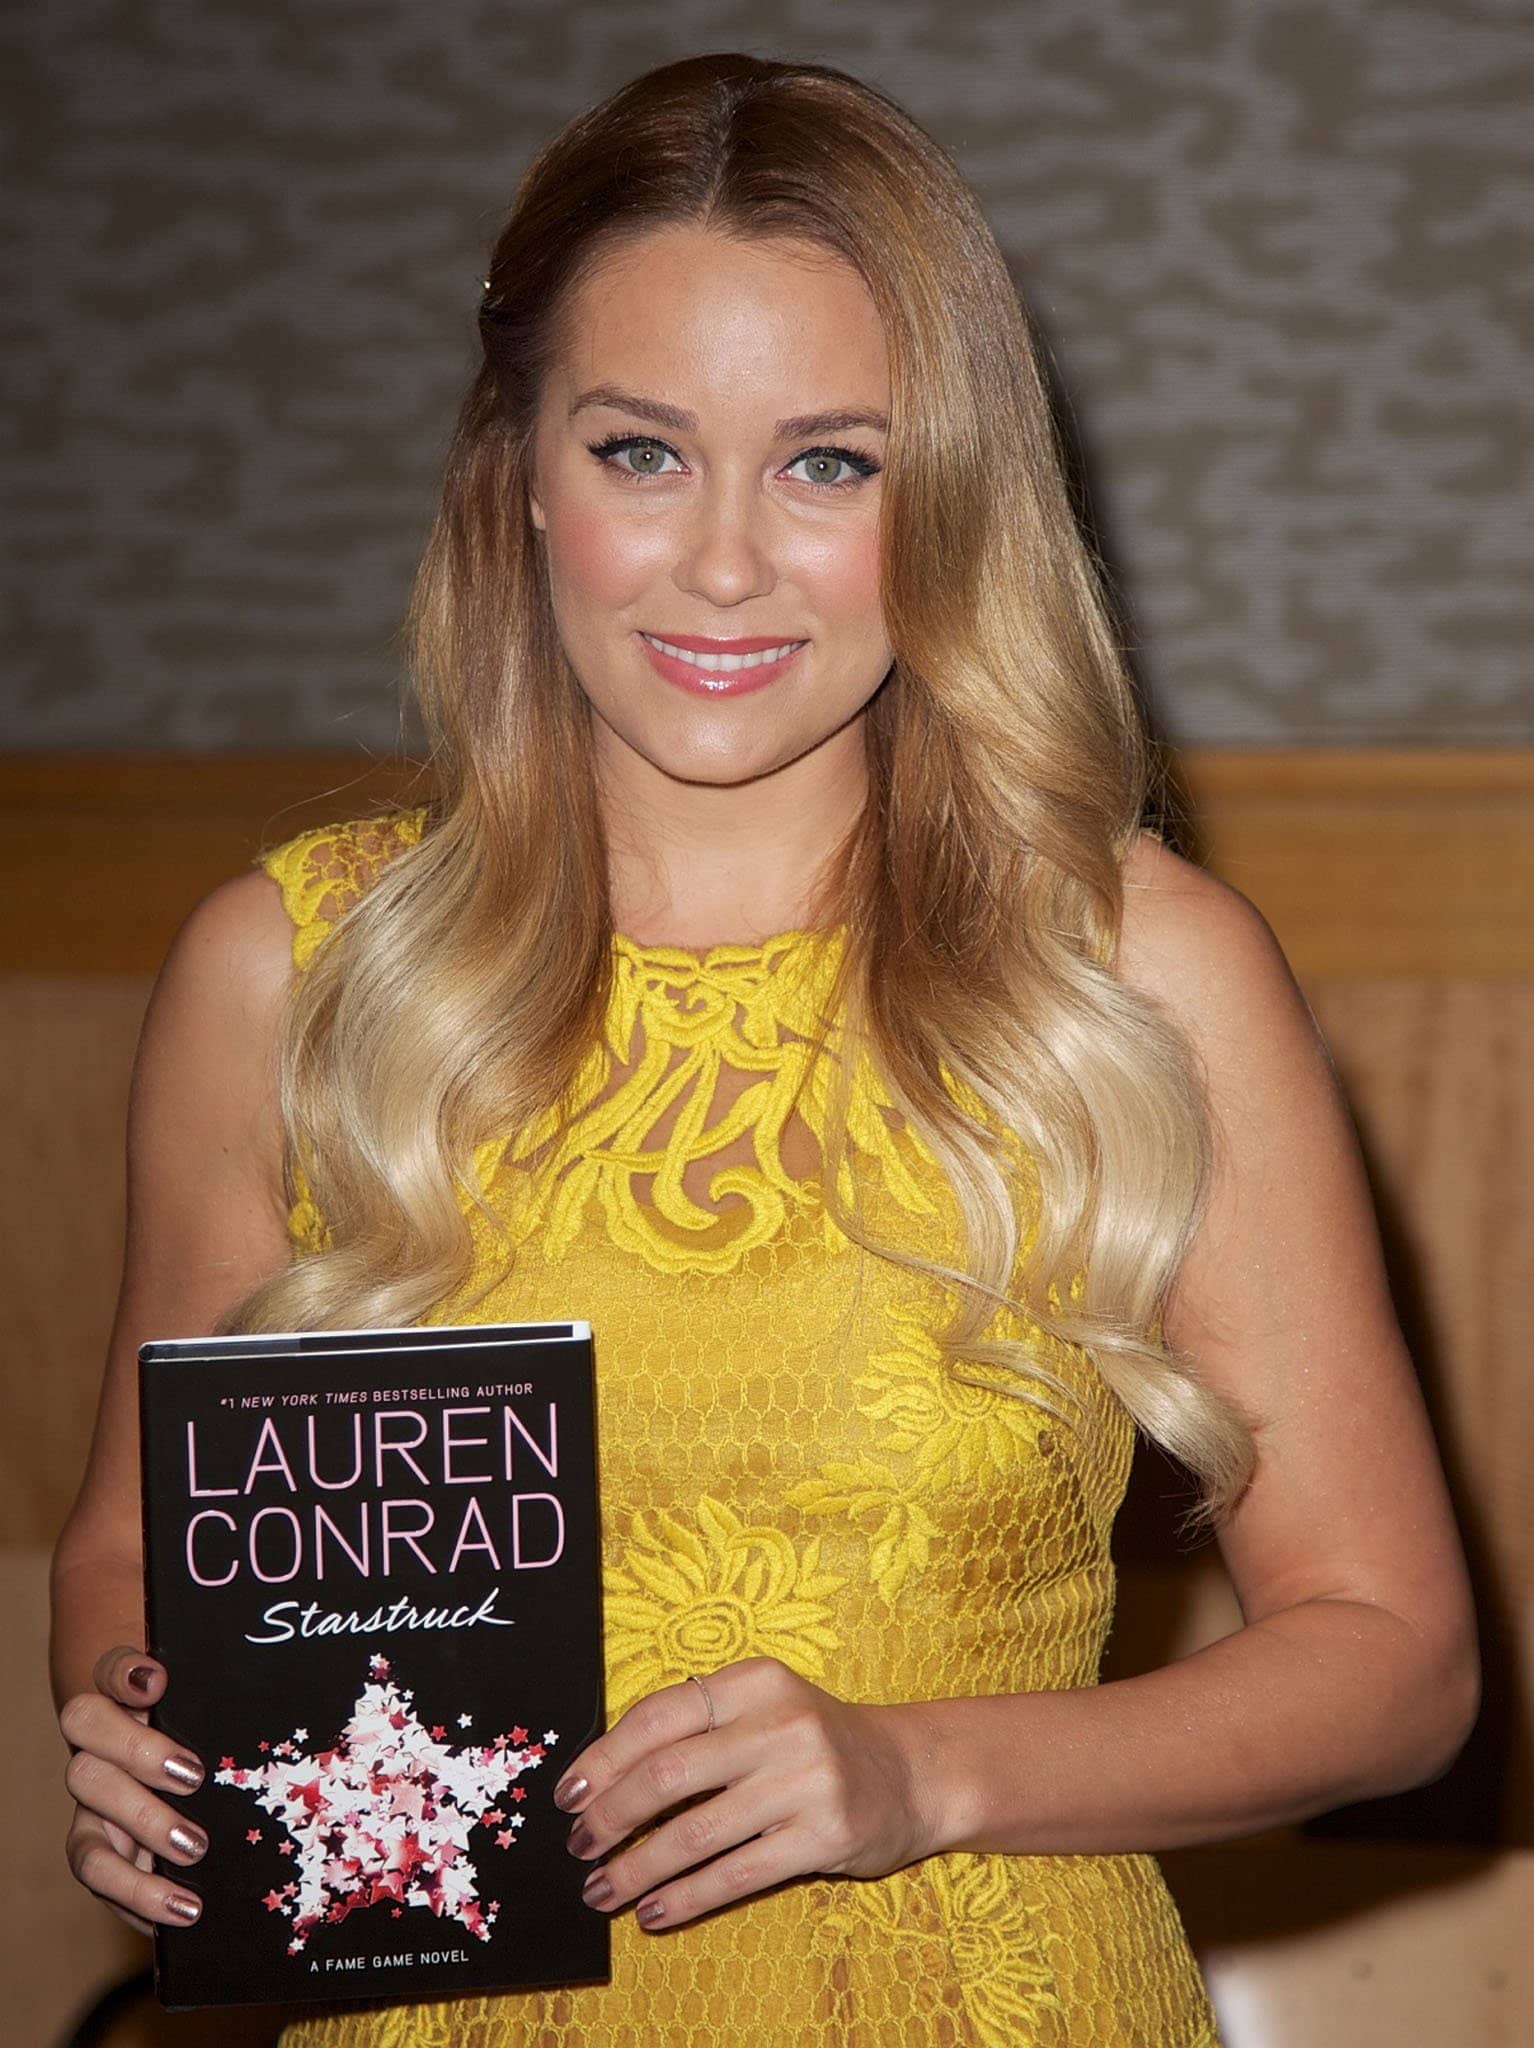 Lauren Conrad is also a fashion designer and an author with several autobiographical and fiction novels under her belt